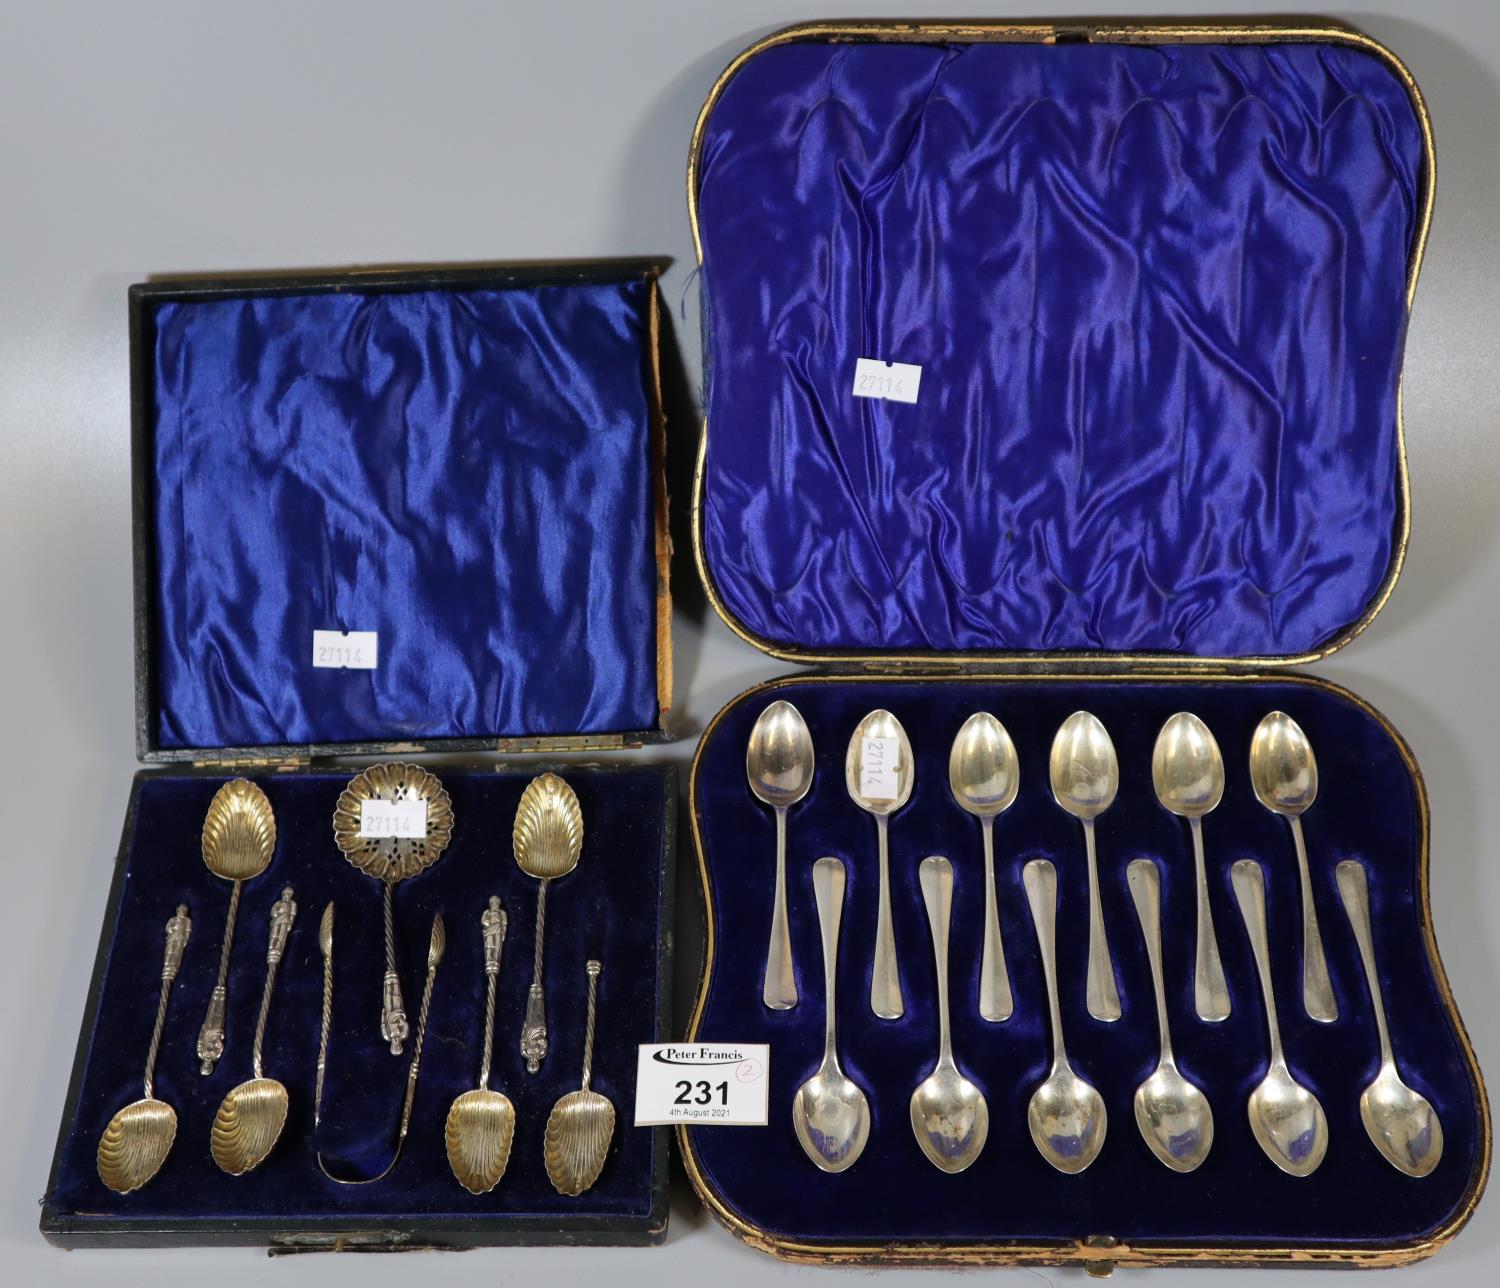 Set of six gilded shell design silver teaspoons with figural terminals and matching sugar nips and